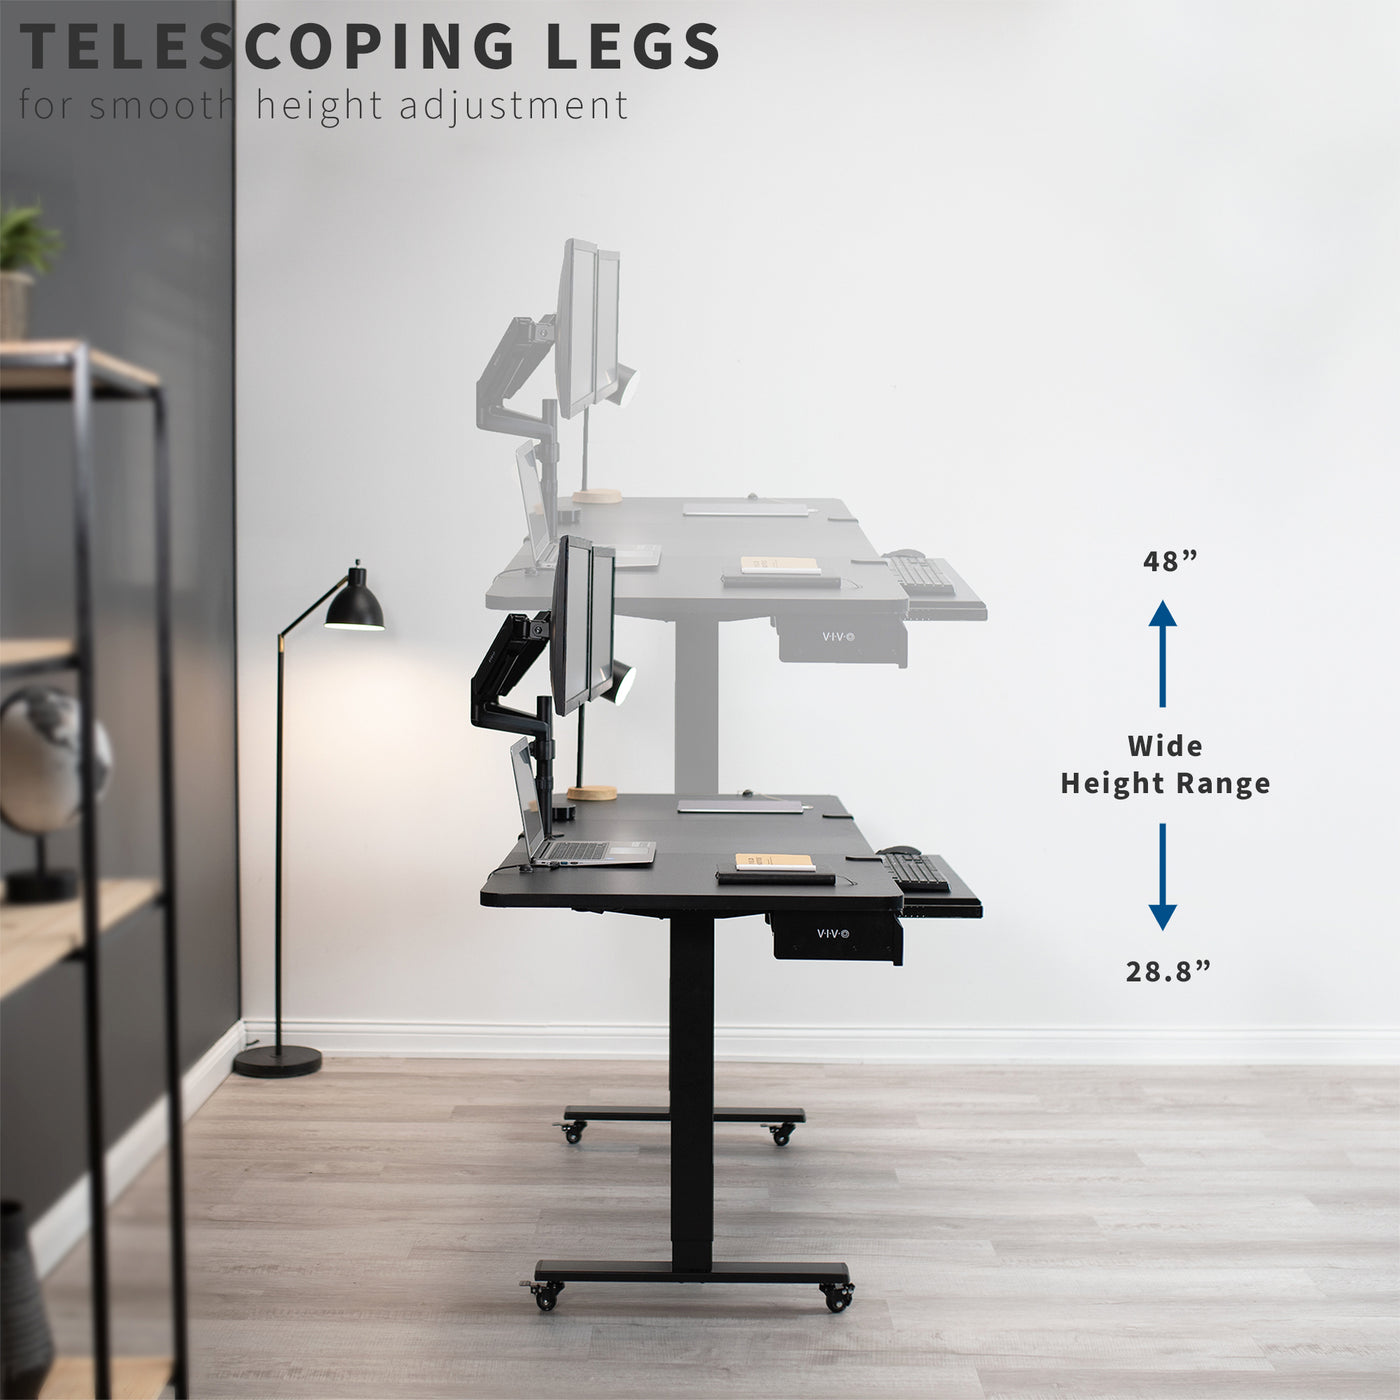 Smooth adjustment with telescoping legs to create the perfect desktop height while working.